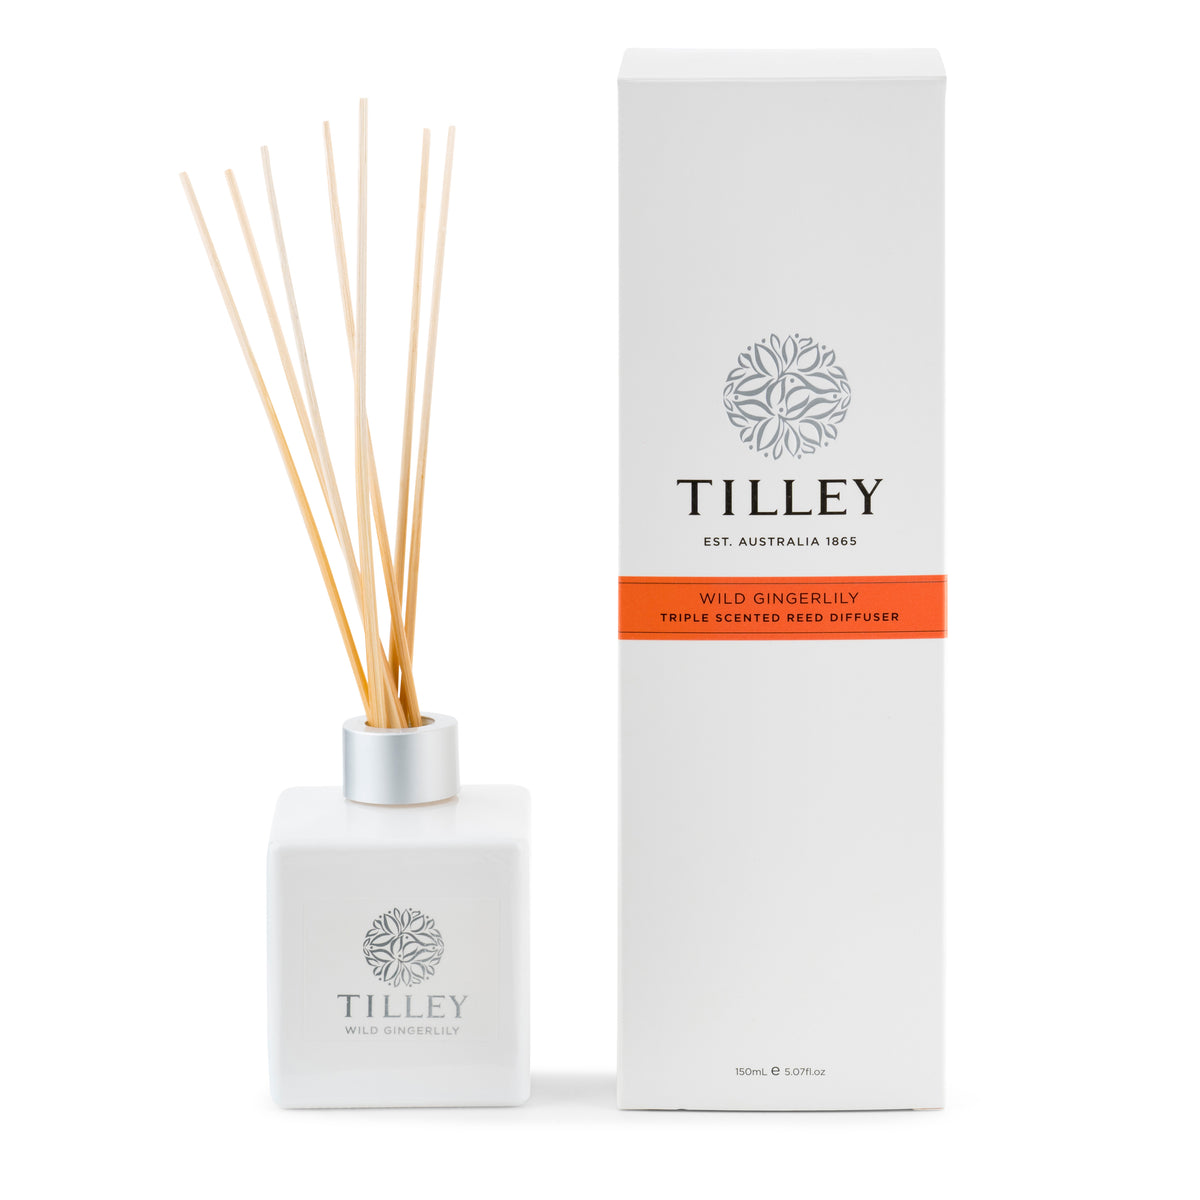 Wild Gingerlily Aromatic Reed Diffuser 150mL